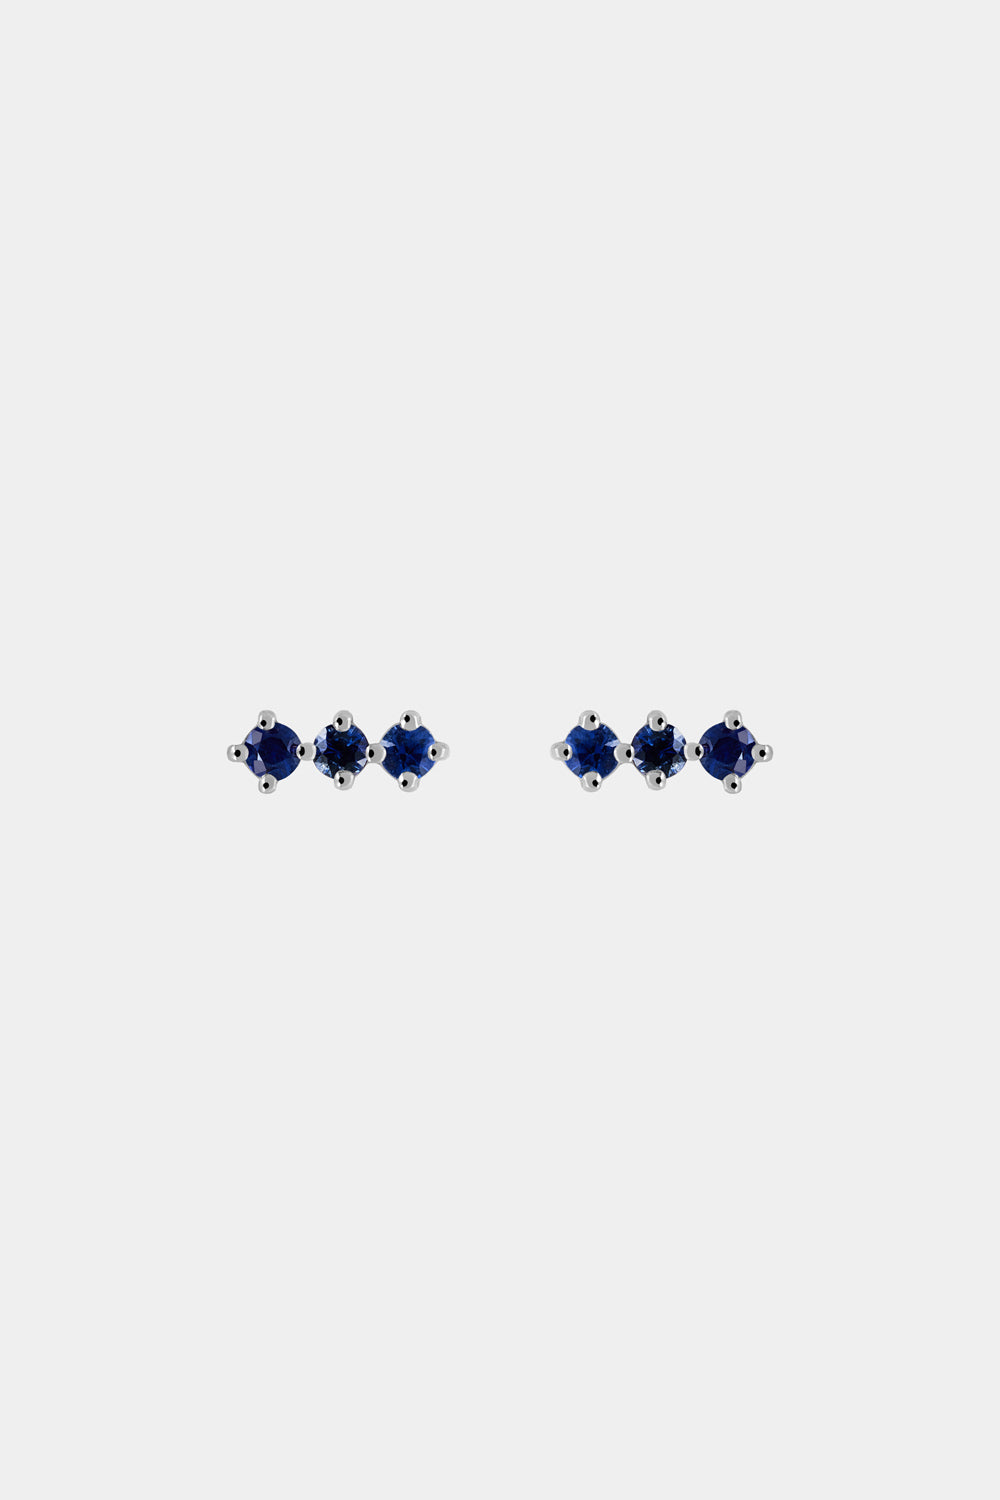 Buttercup Sapphire Bar Earrings | White Gold, More Options Available